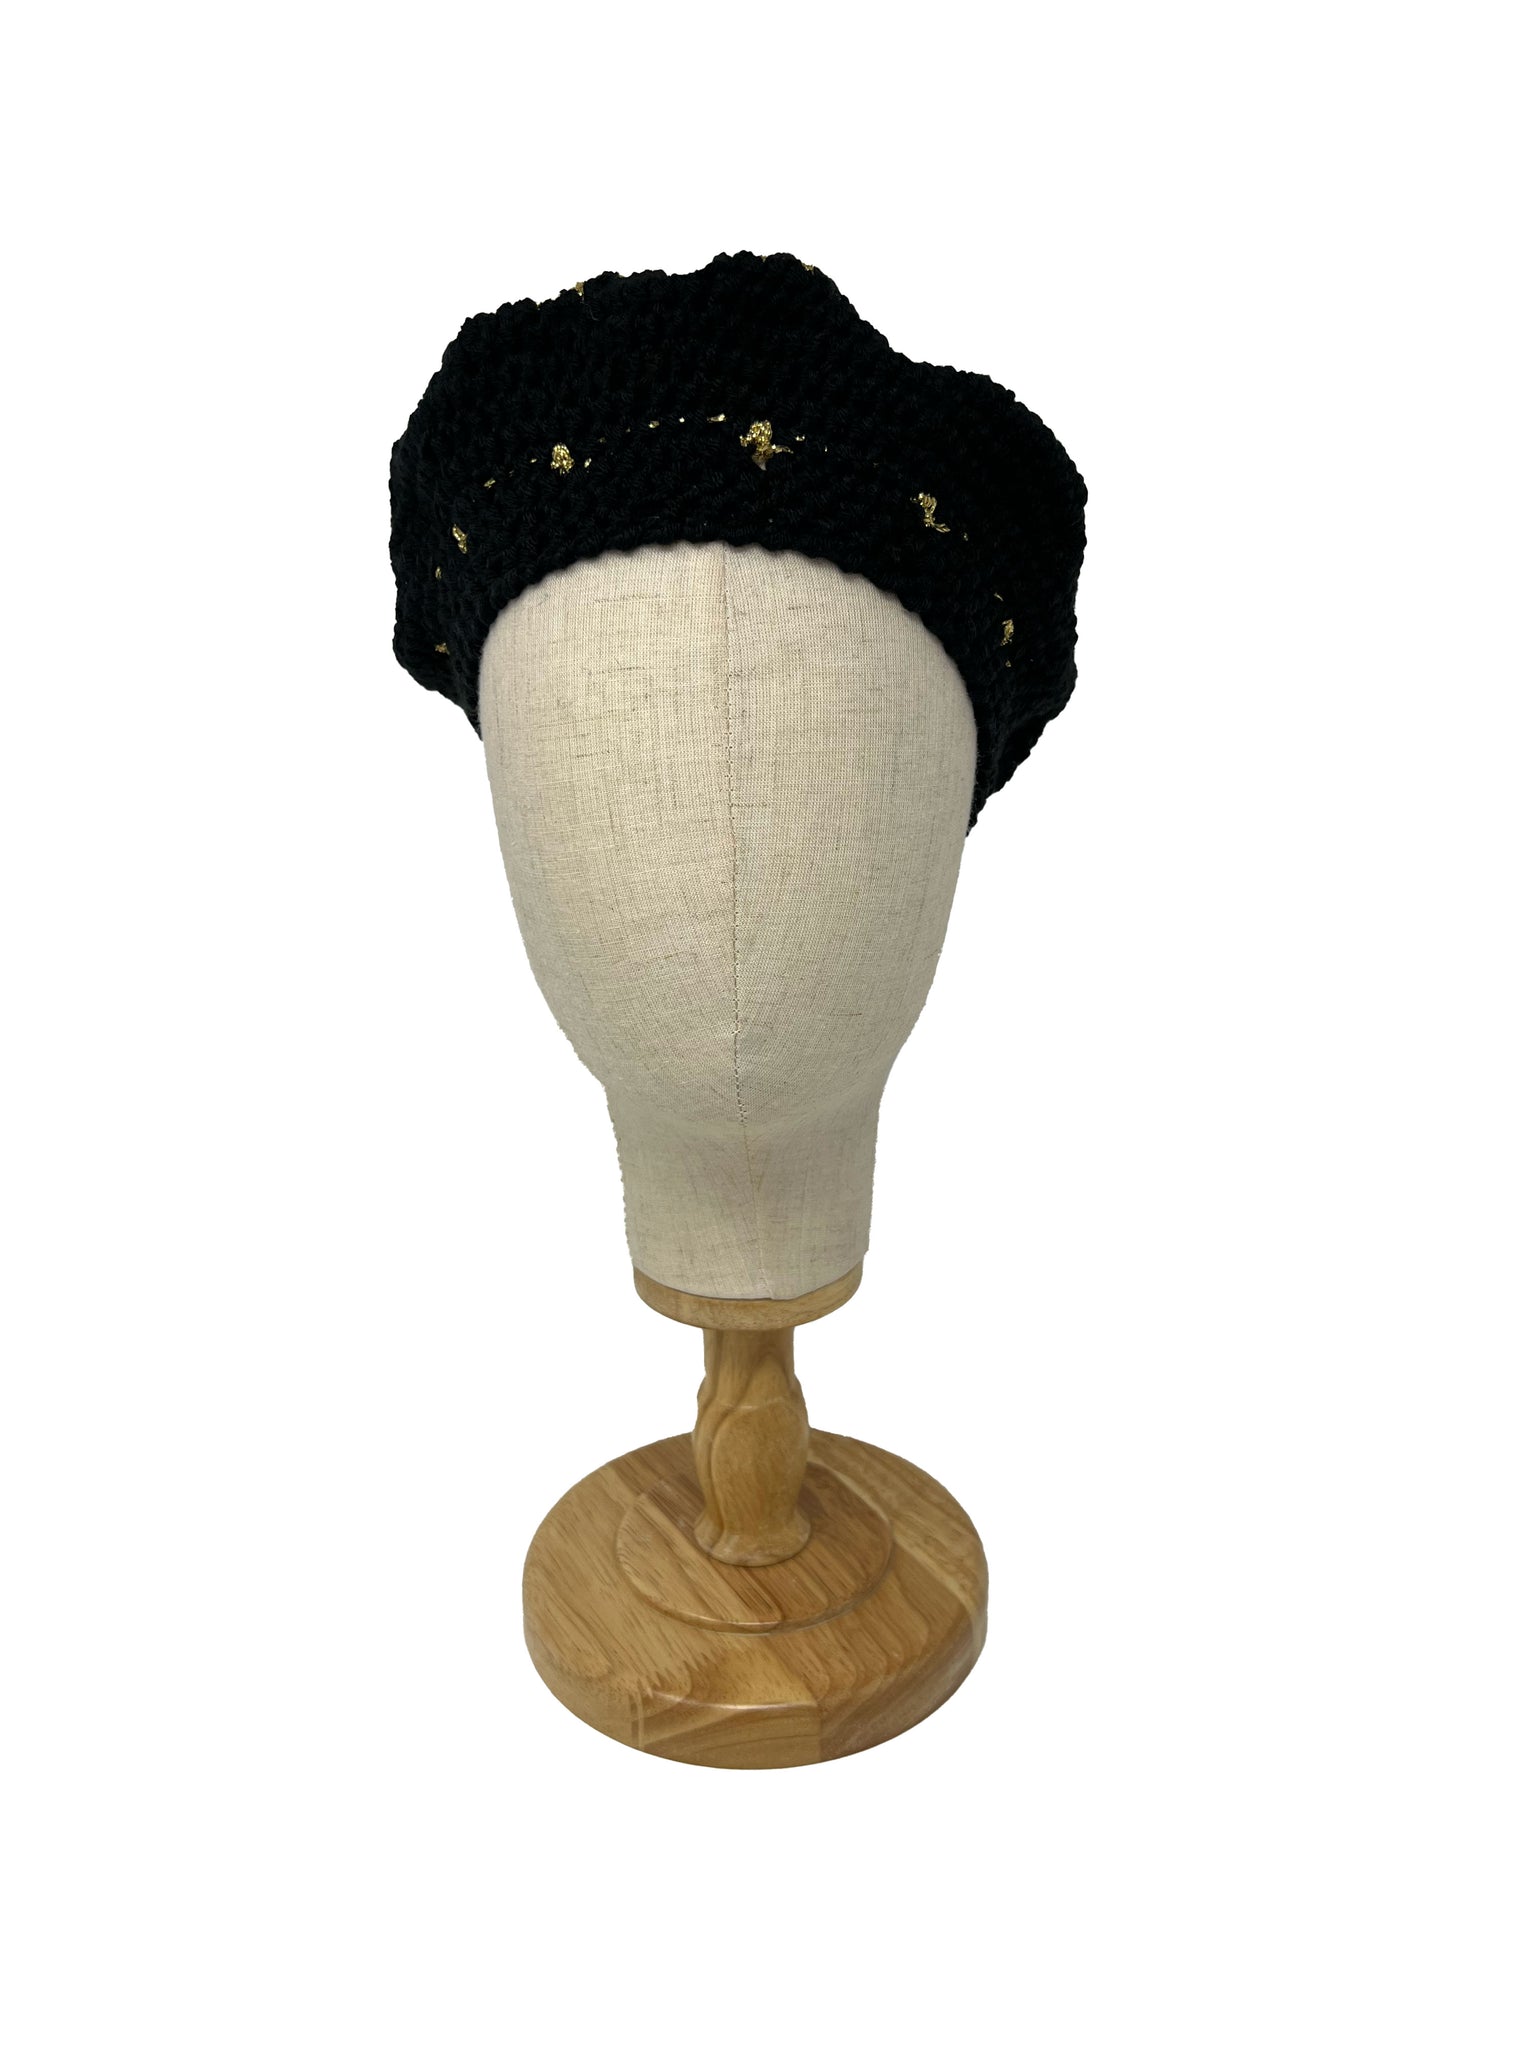 Black and gold wool crochet beret